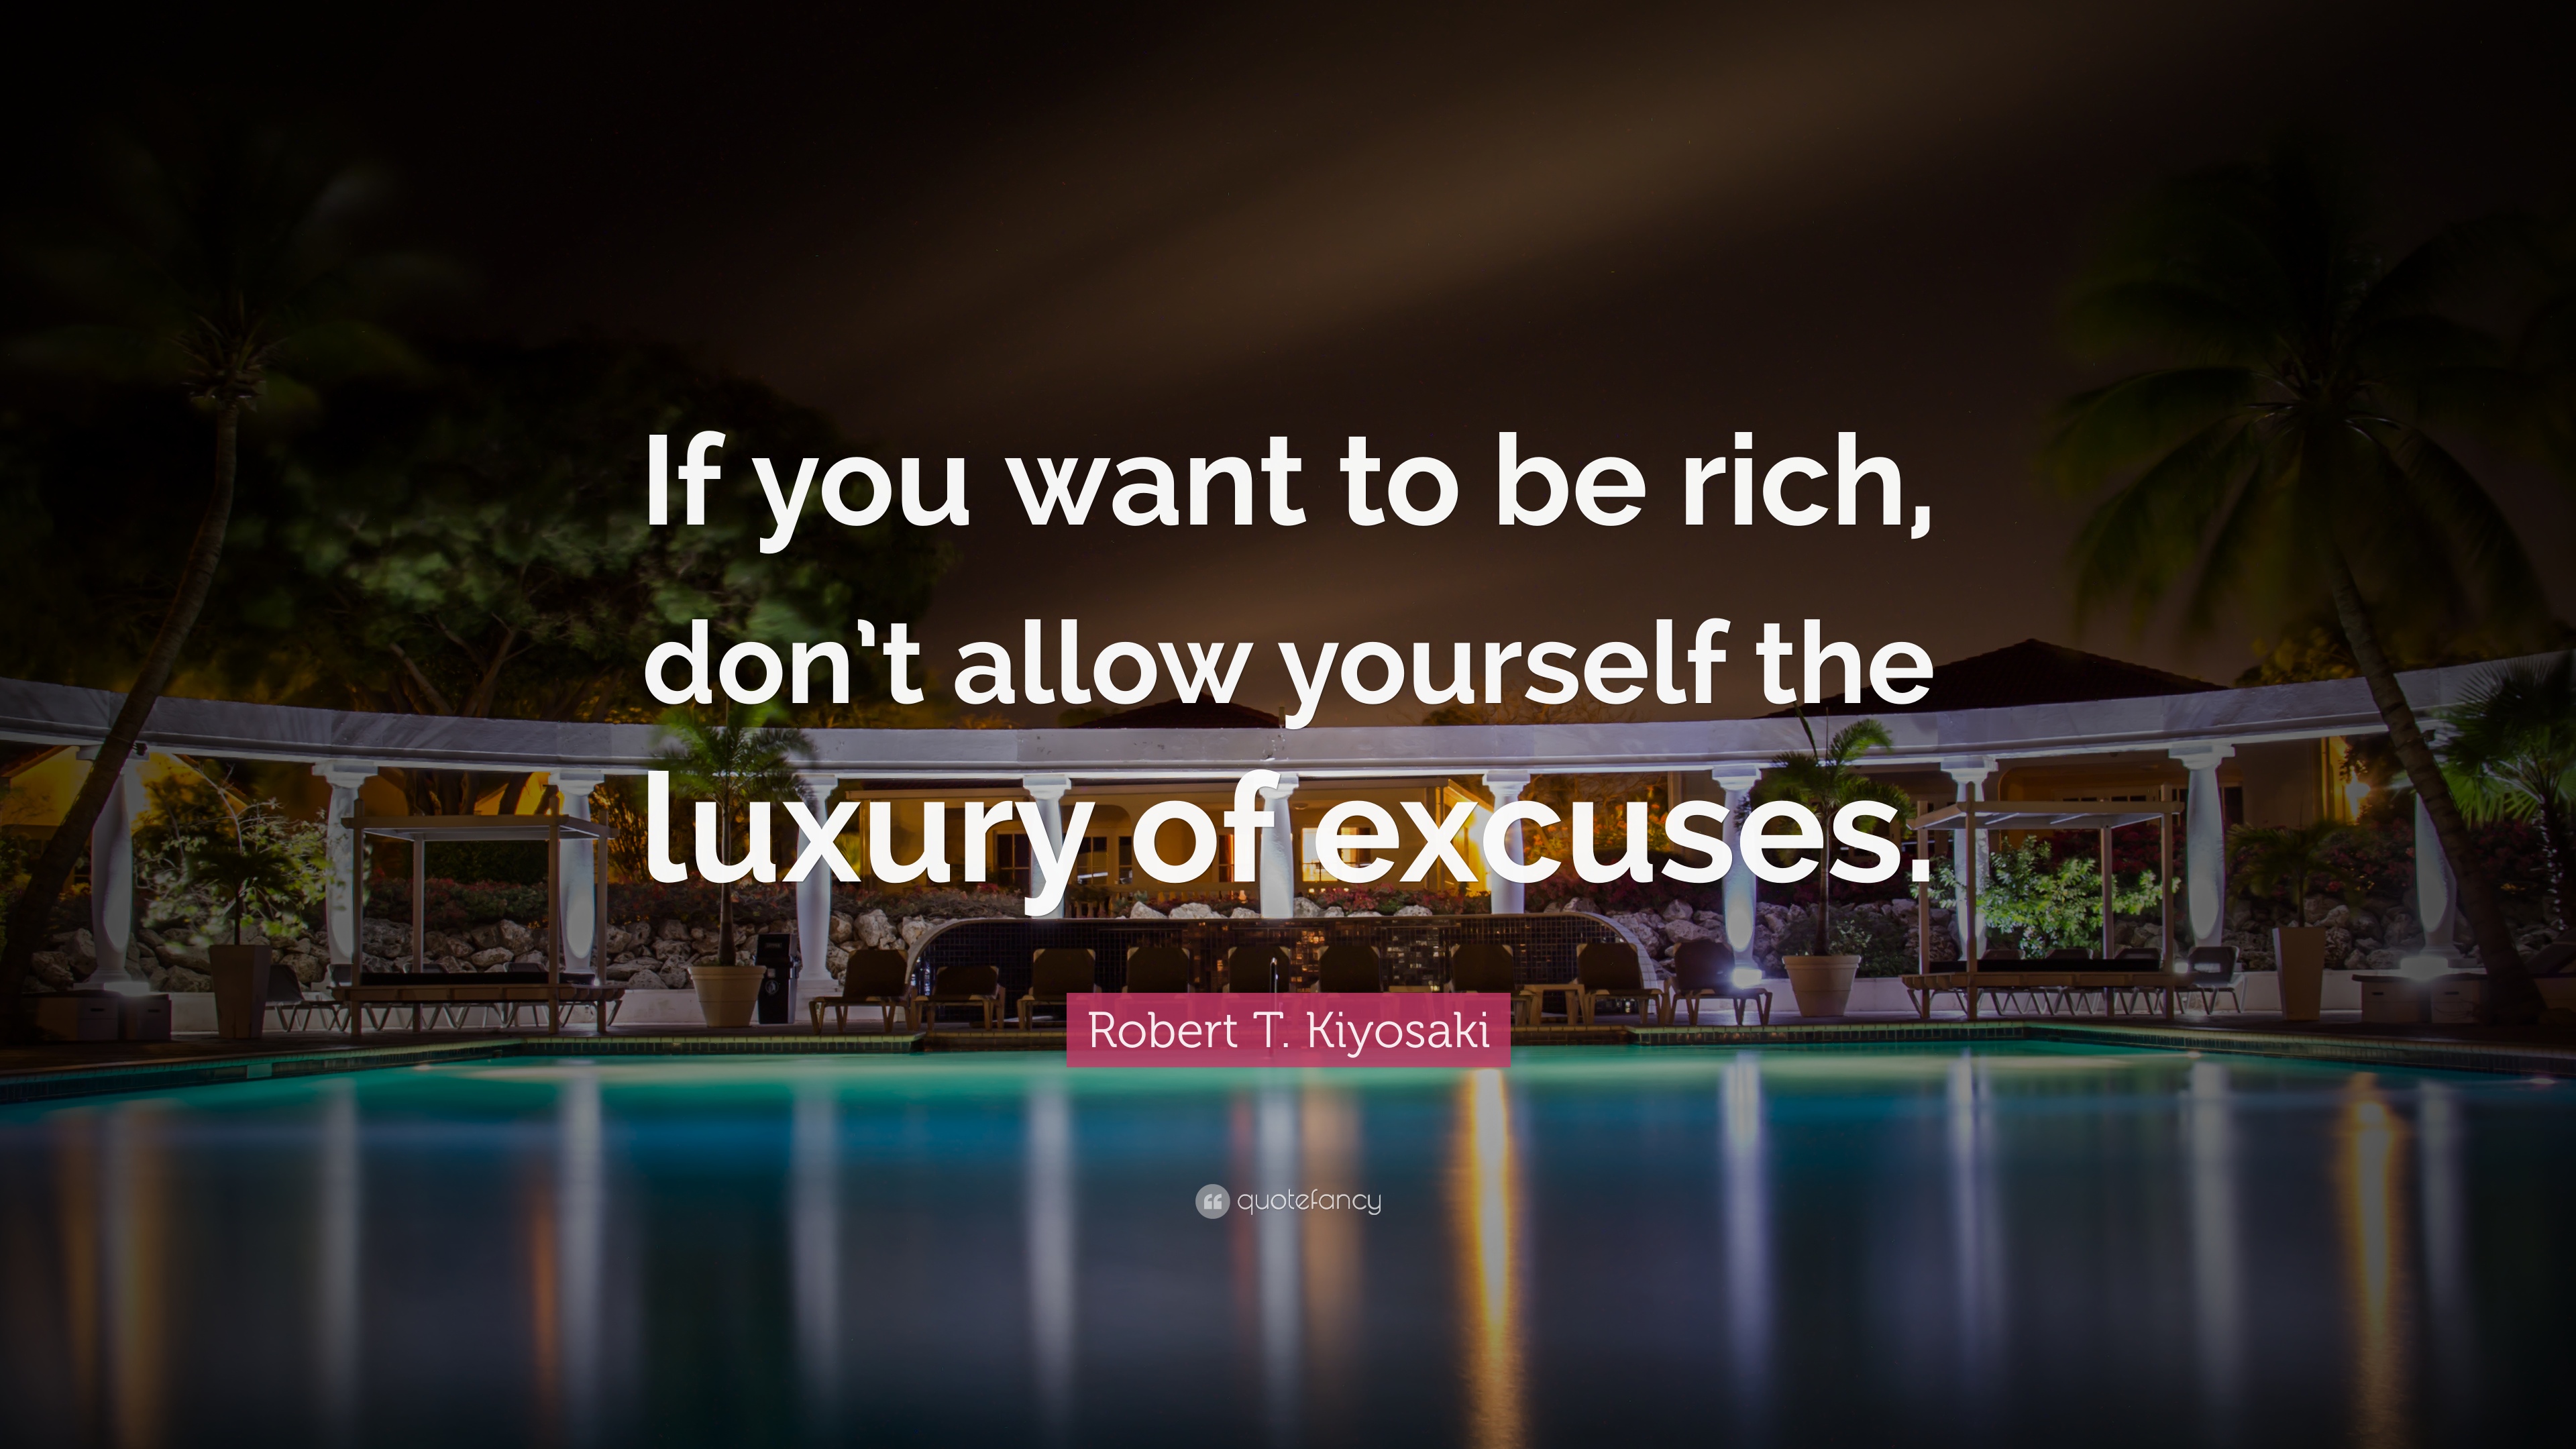 Robert T. Kiyosaki Quote: “If you want to be rich, don't allow